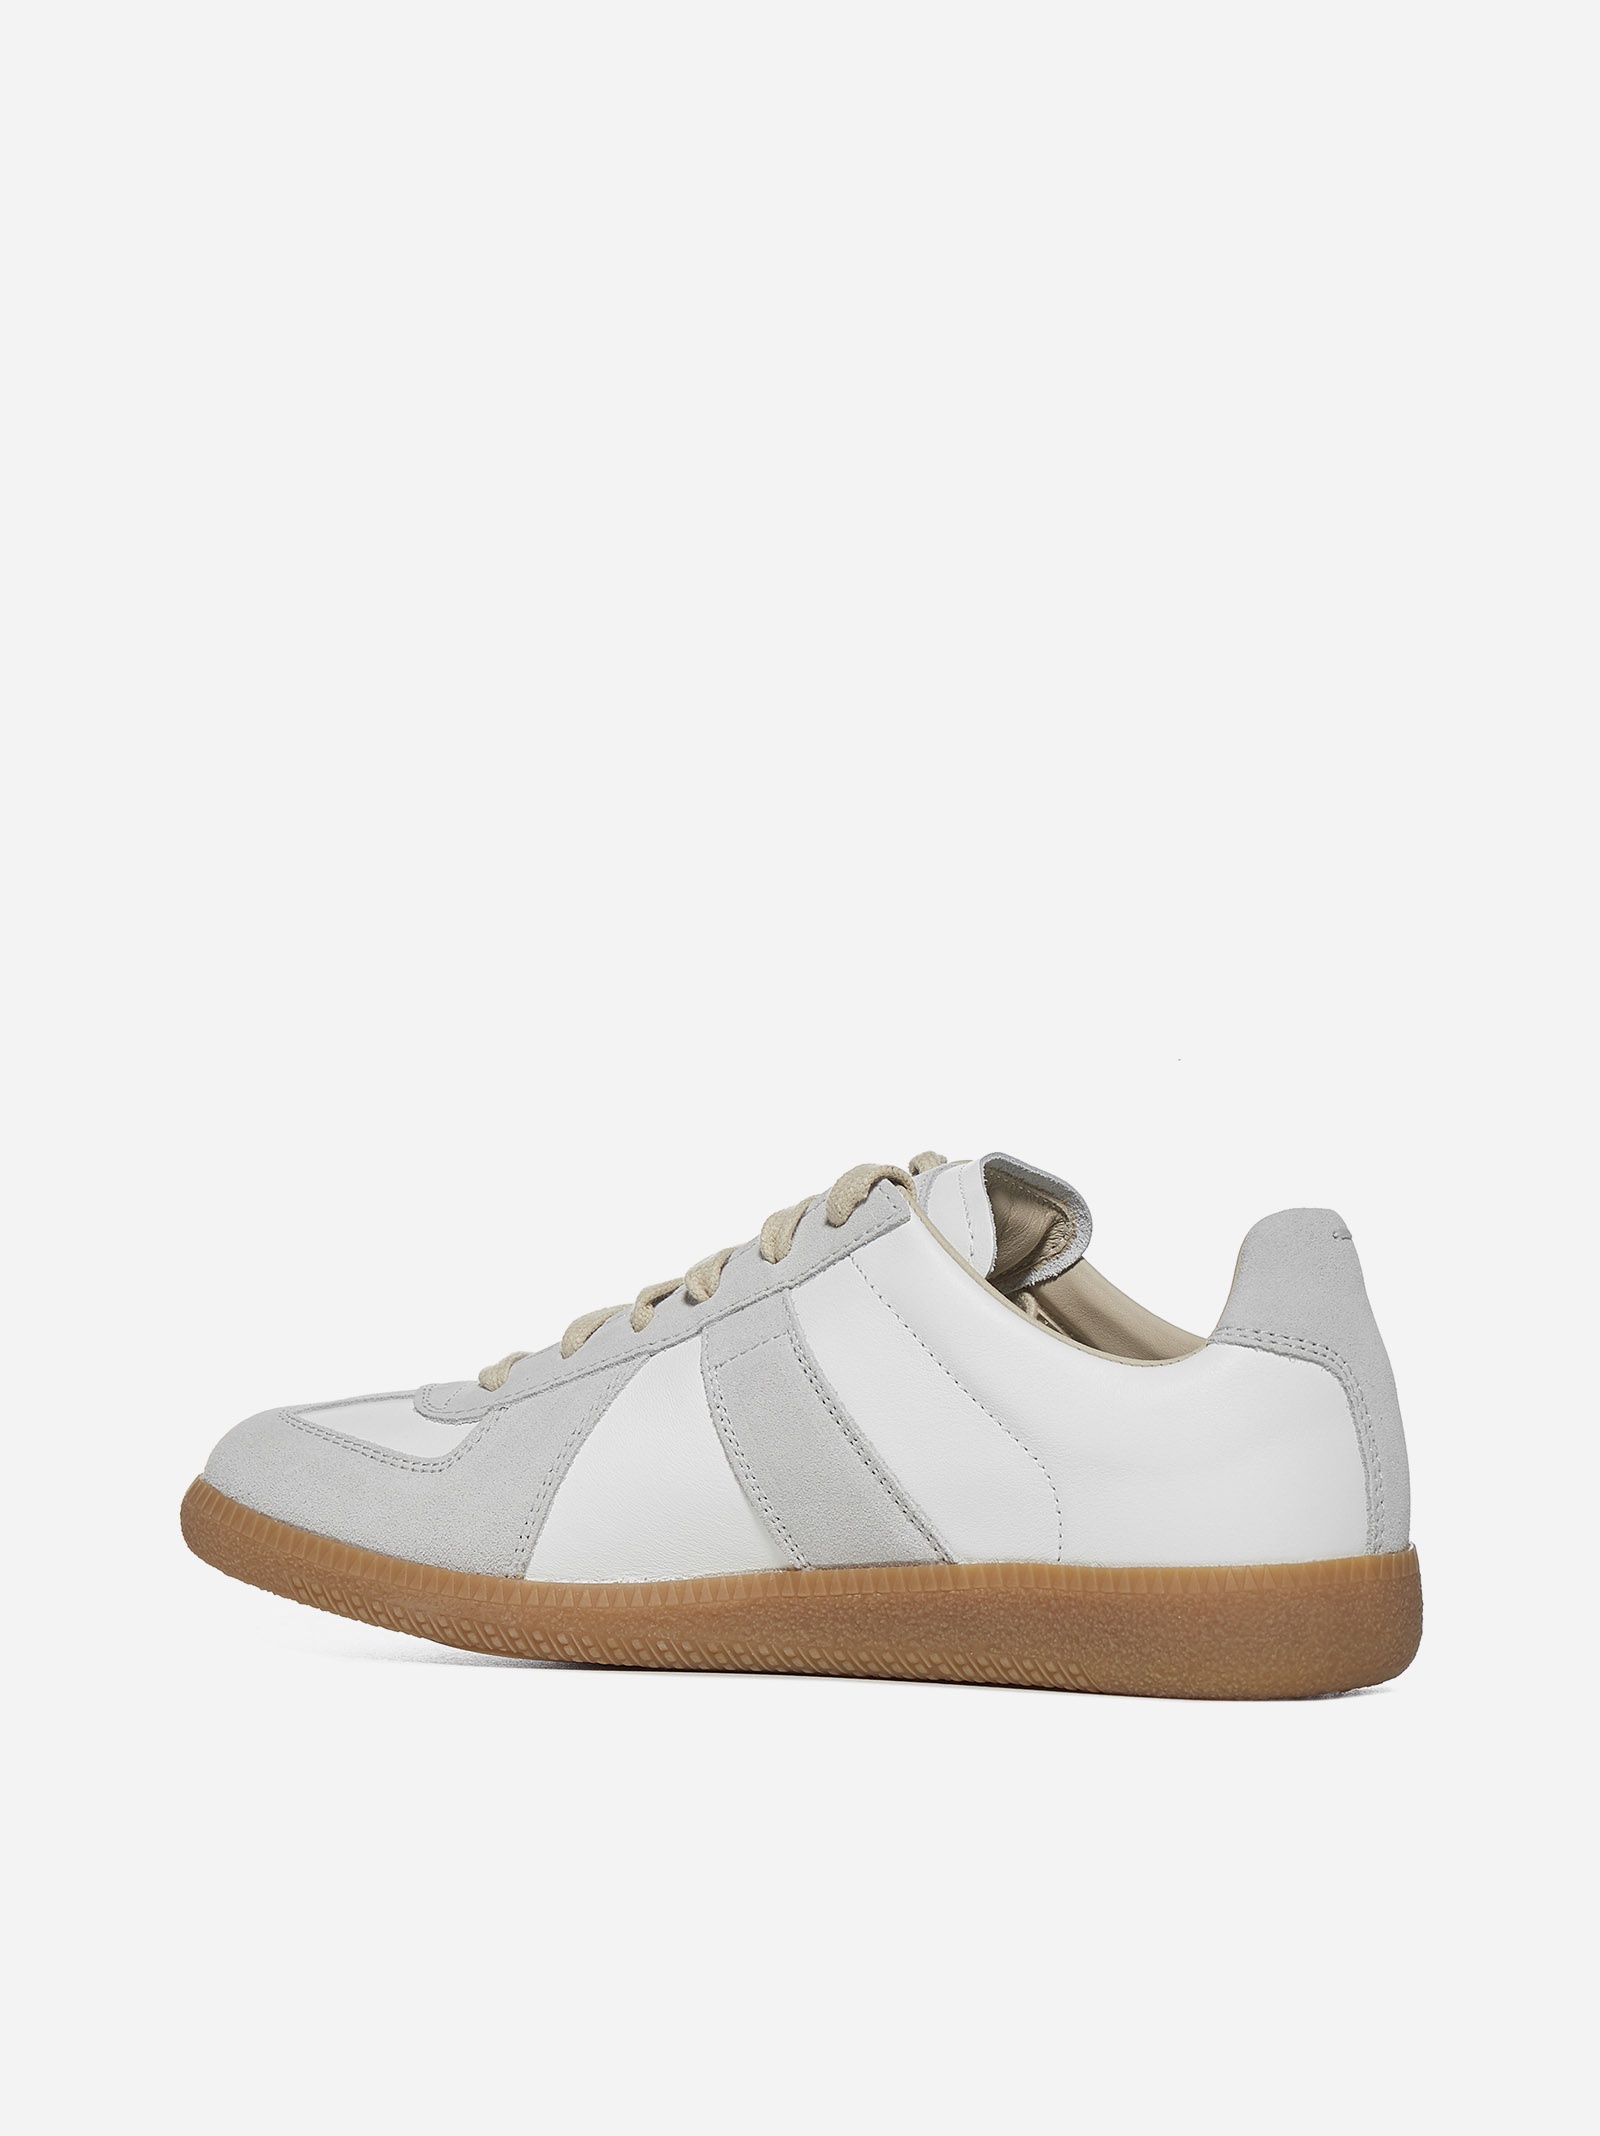 Replica leather and suede sneakers - 3